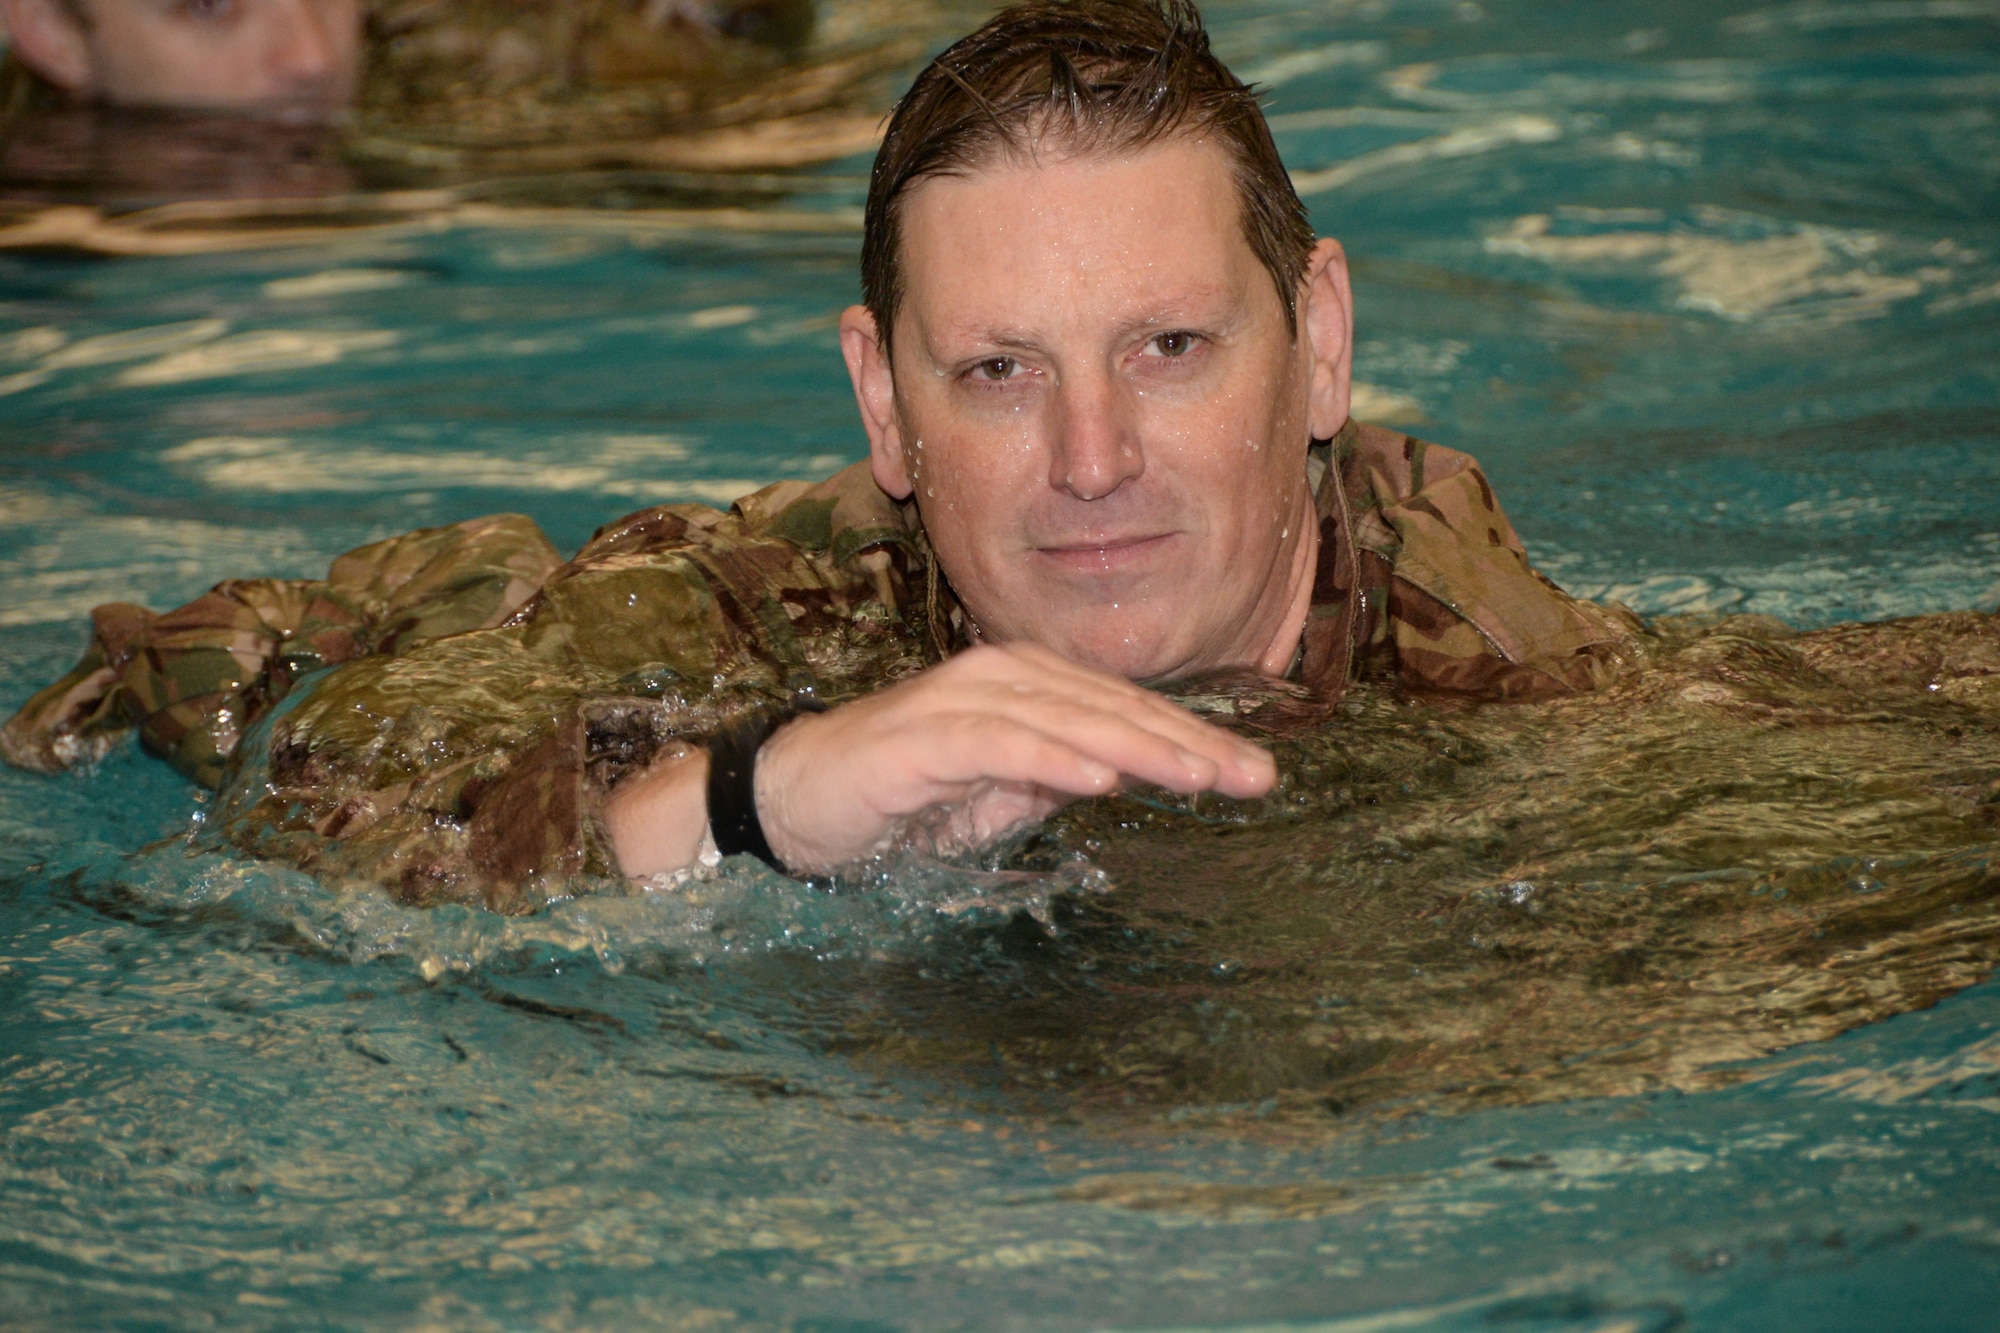 U.S. Air Force Lt. Col. Chris Snider, assigned to the Indiana Air National Guard, 181st Intelligence Wing, 113th Air Support Operations Squadron commander, practices using his uniform trousers as a flotation device during their combat water survival training at the Sports and Recreation Center on the campus of Rose-Hulman Institute of Technology in Terre Haute Feb. 6, 2016. (U.S. Air National Guard photo by Senior Airman Lonnie Wiram)